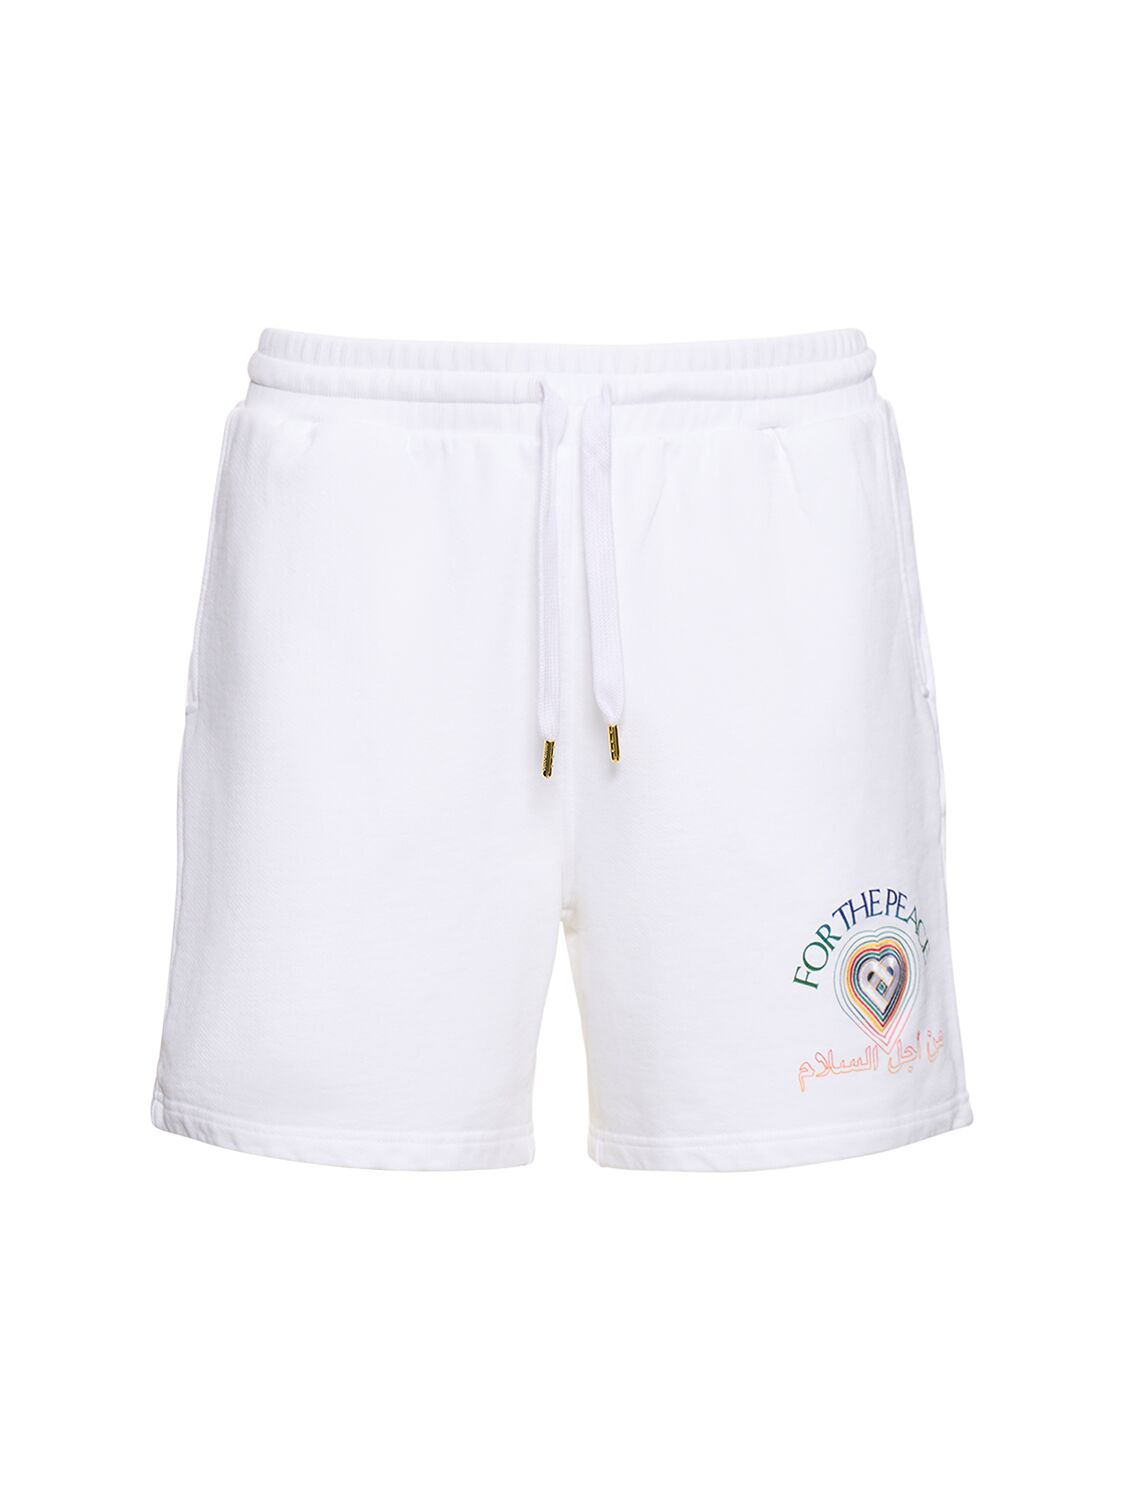 For The Peace Cotton Sweat Shorts – MEN > CLOTHING > SHORTS